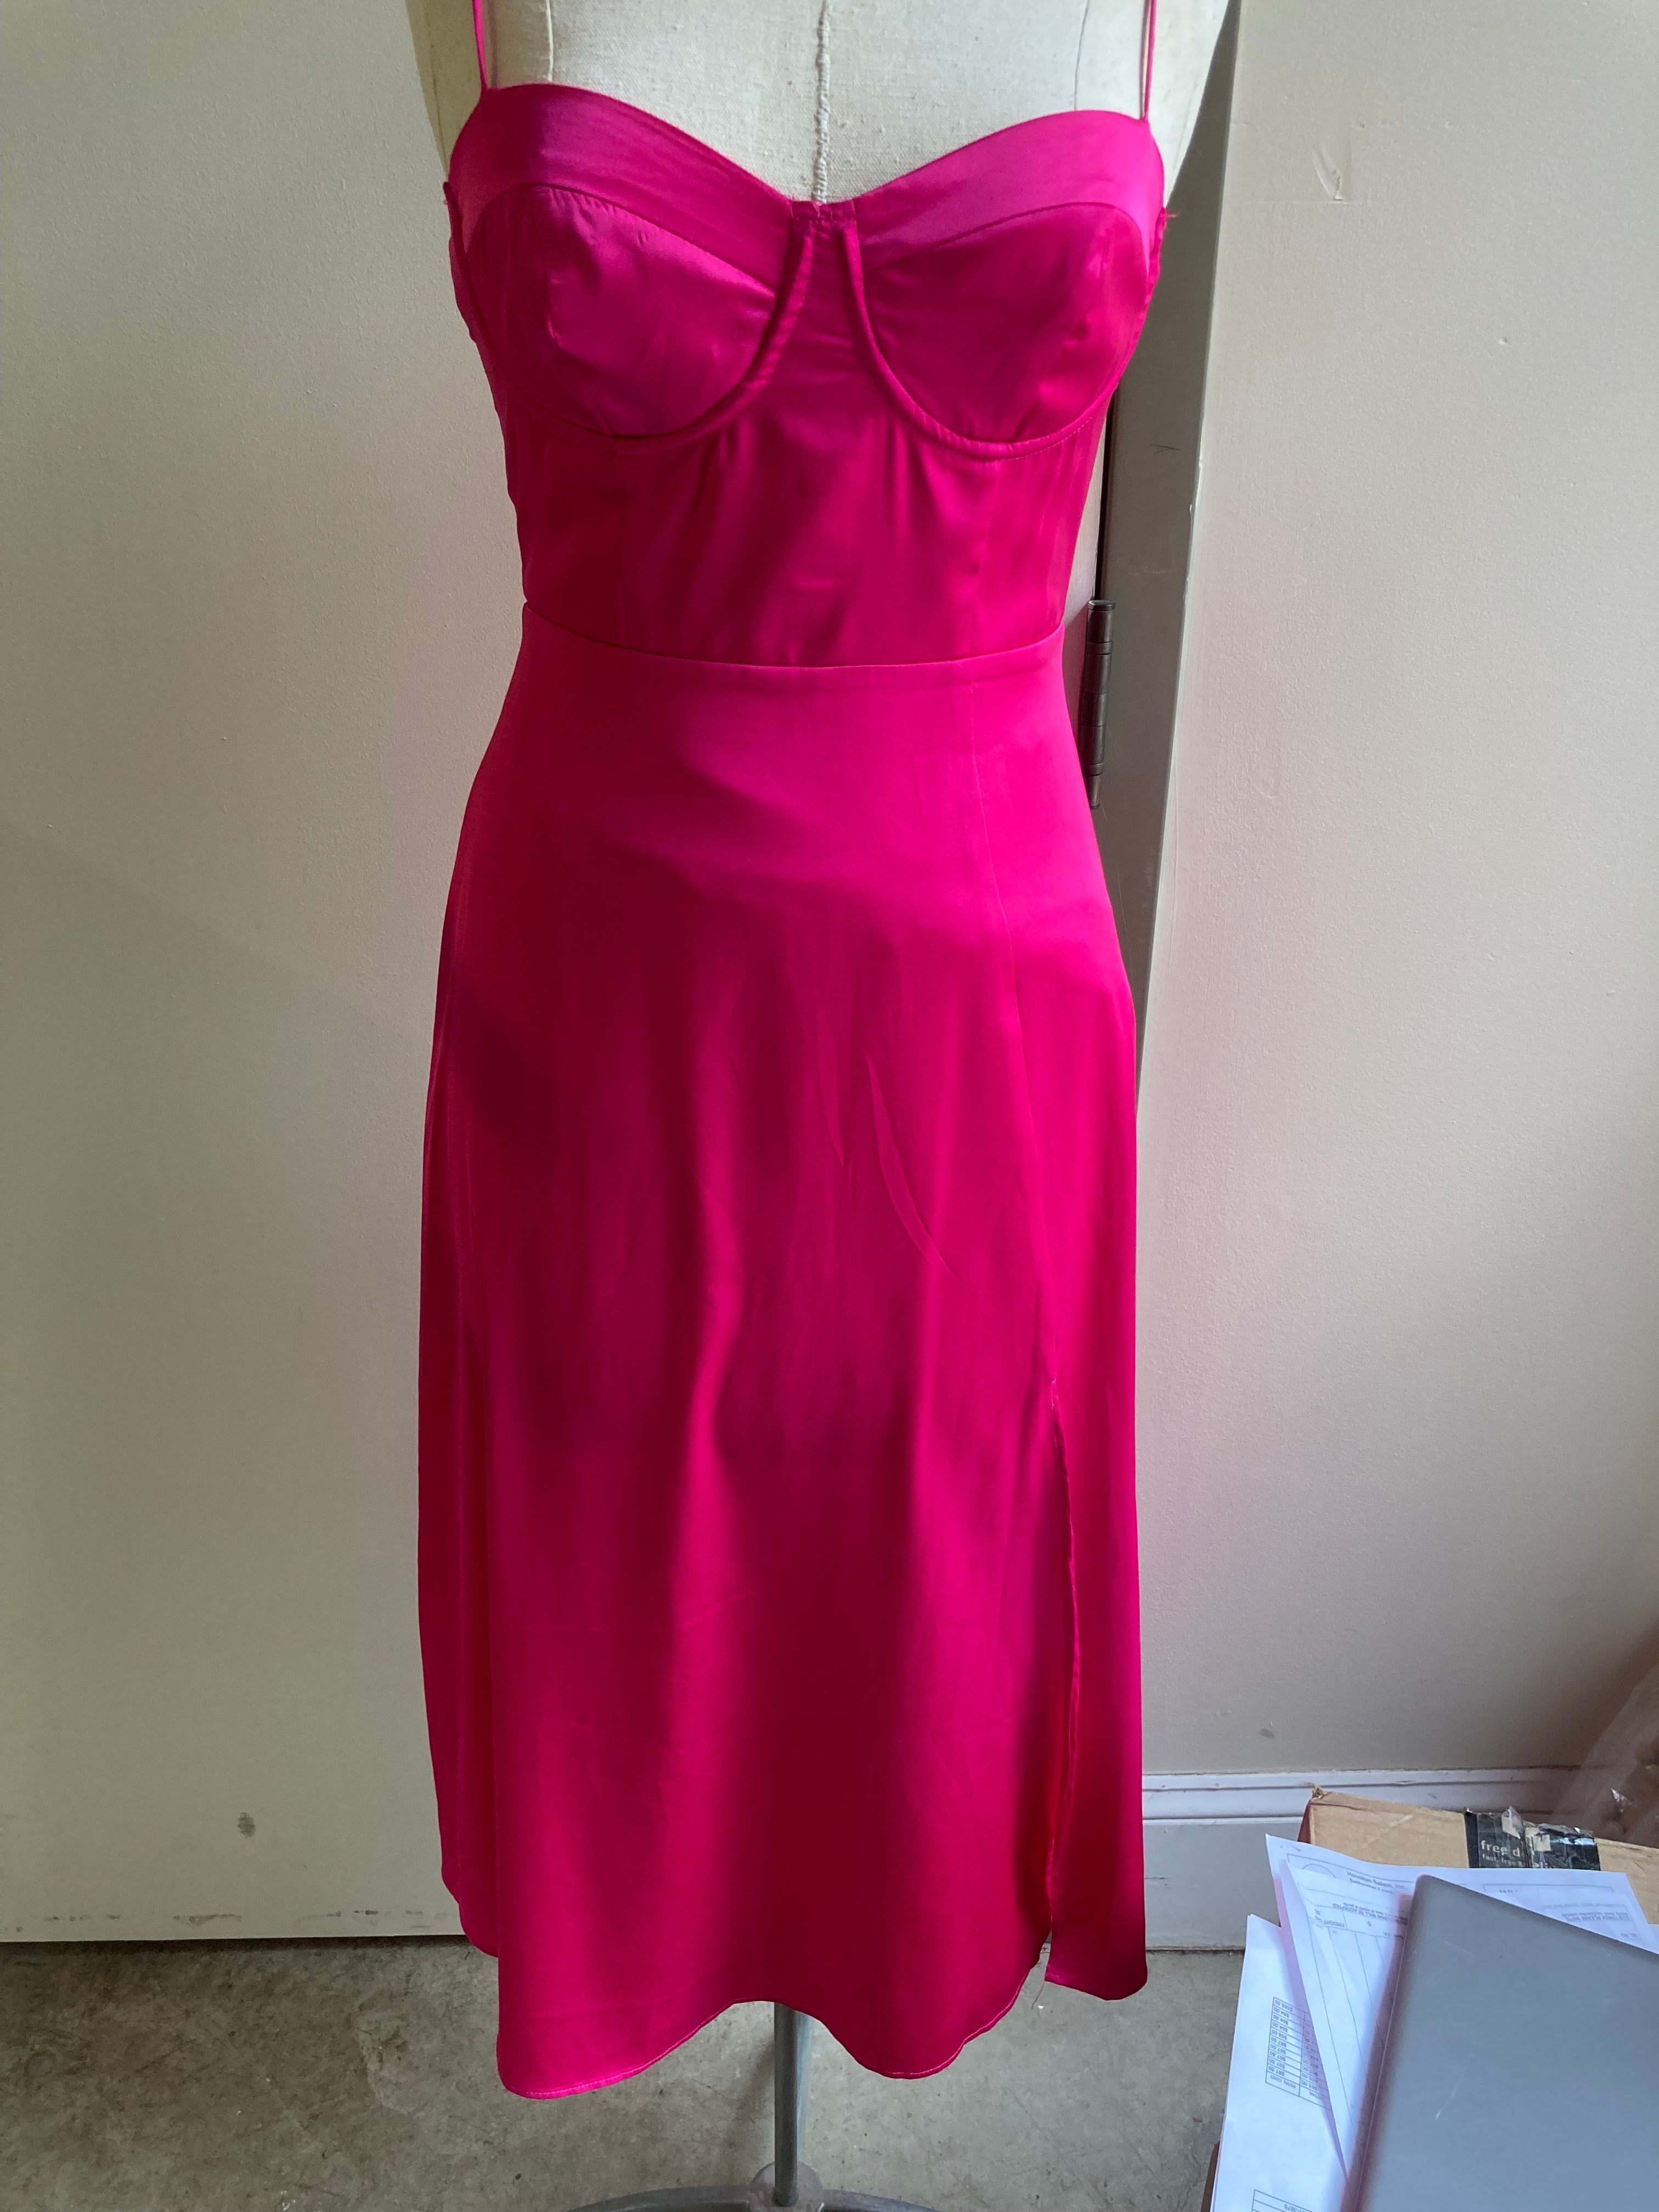 
  
  Astr Hot Pink Dress-Size Small
  
